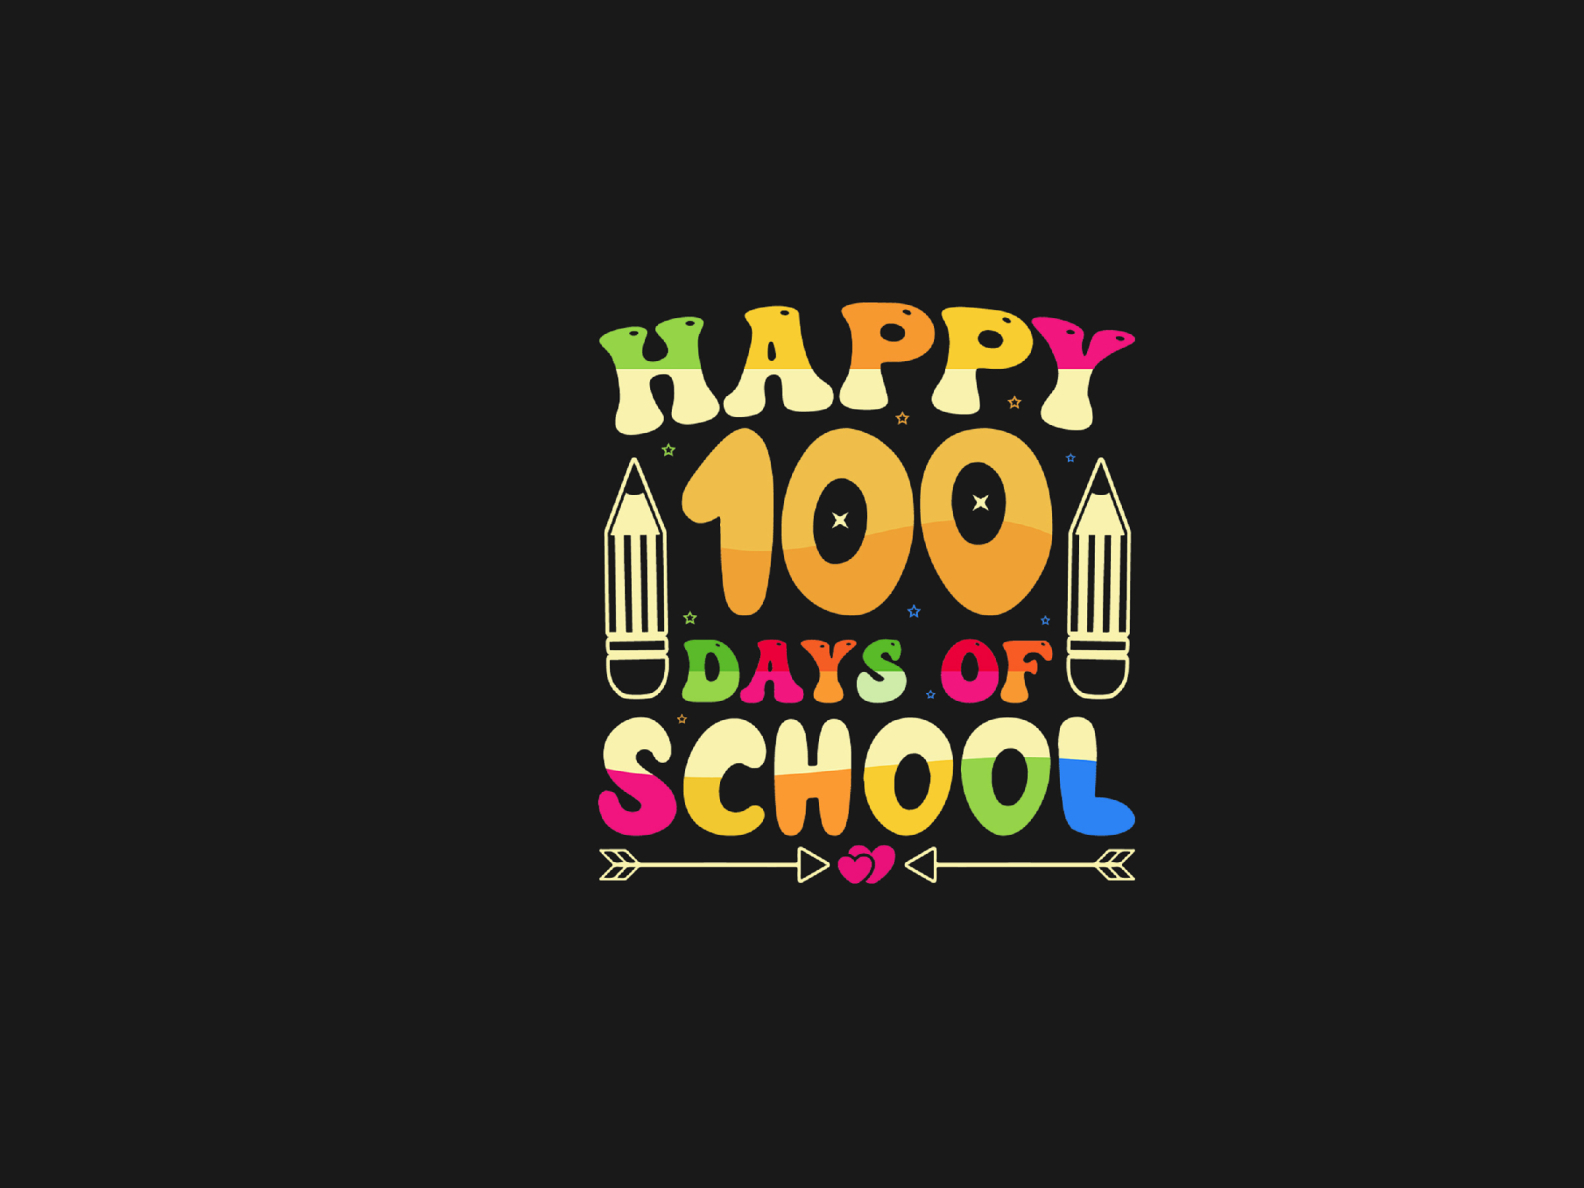 100 DAYS OF SCHOOL QUOTE TEMPLATE by Unique_Gallery on Dribbble